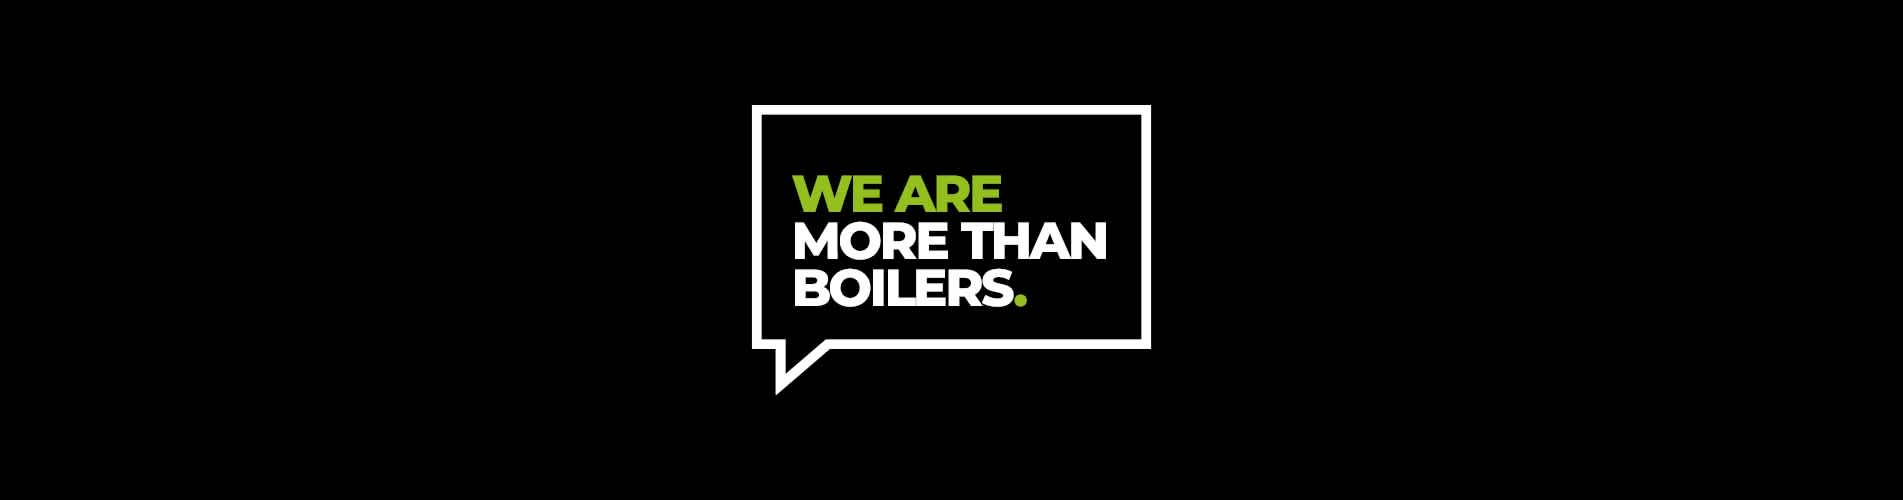 Blog We are more than boilers Header